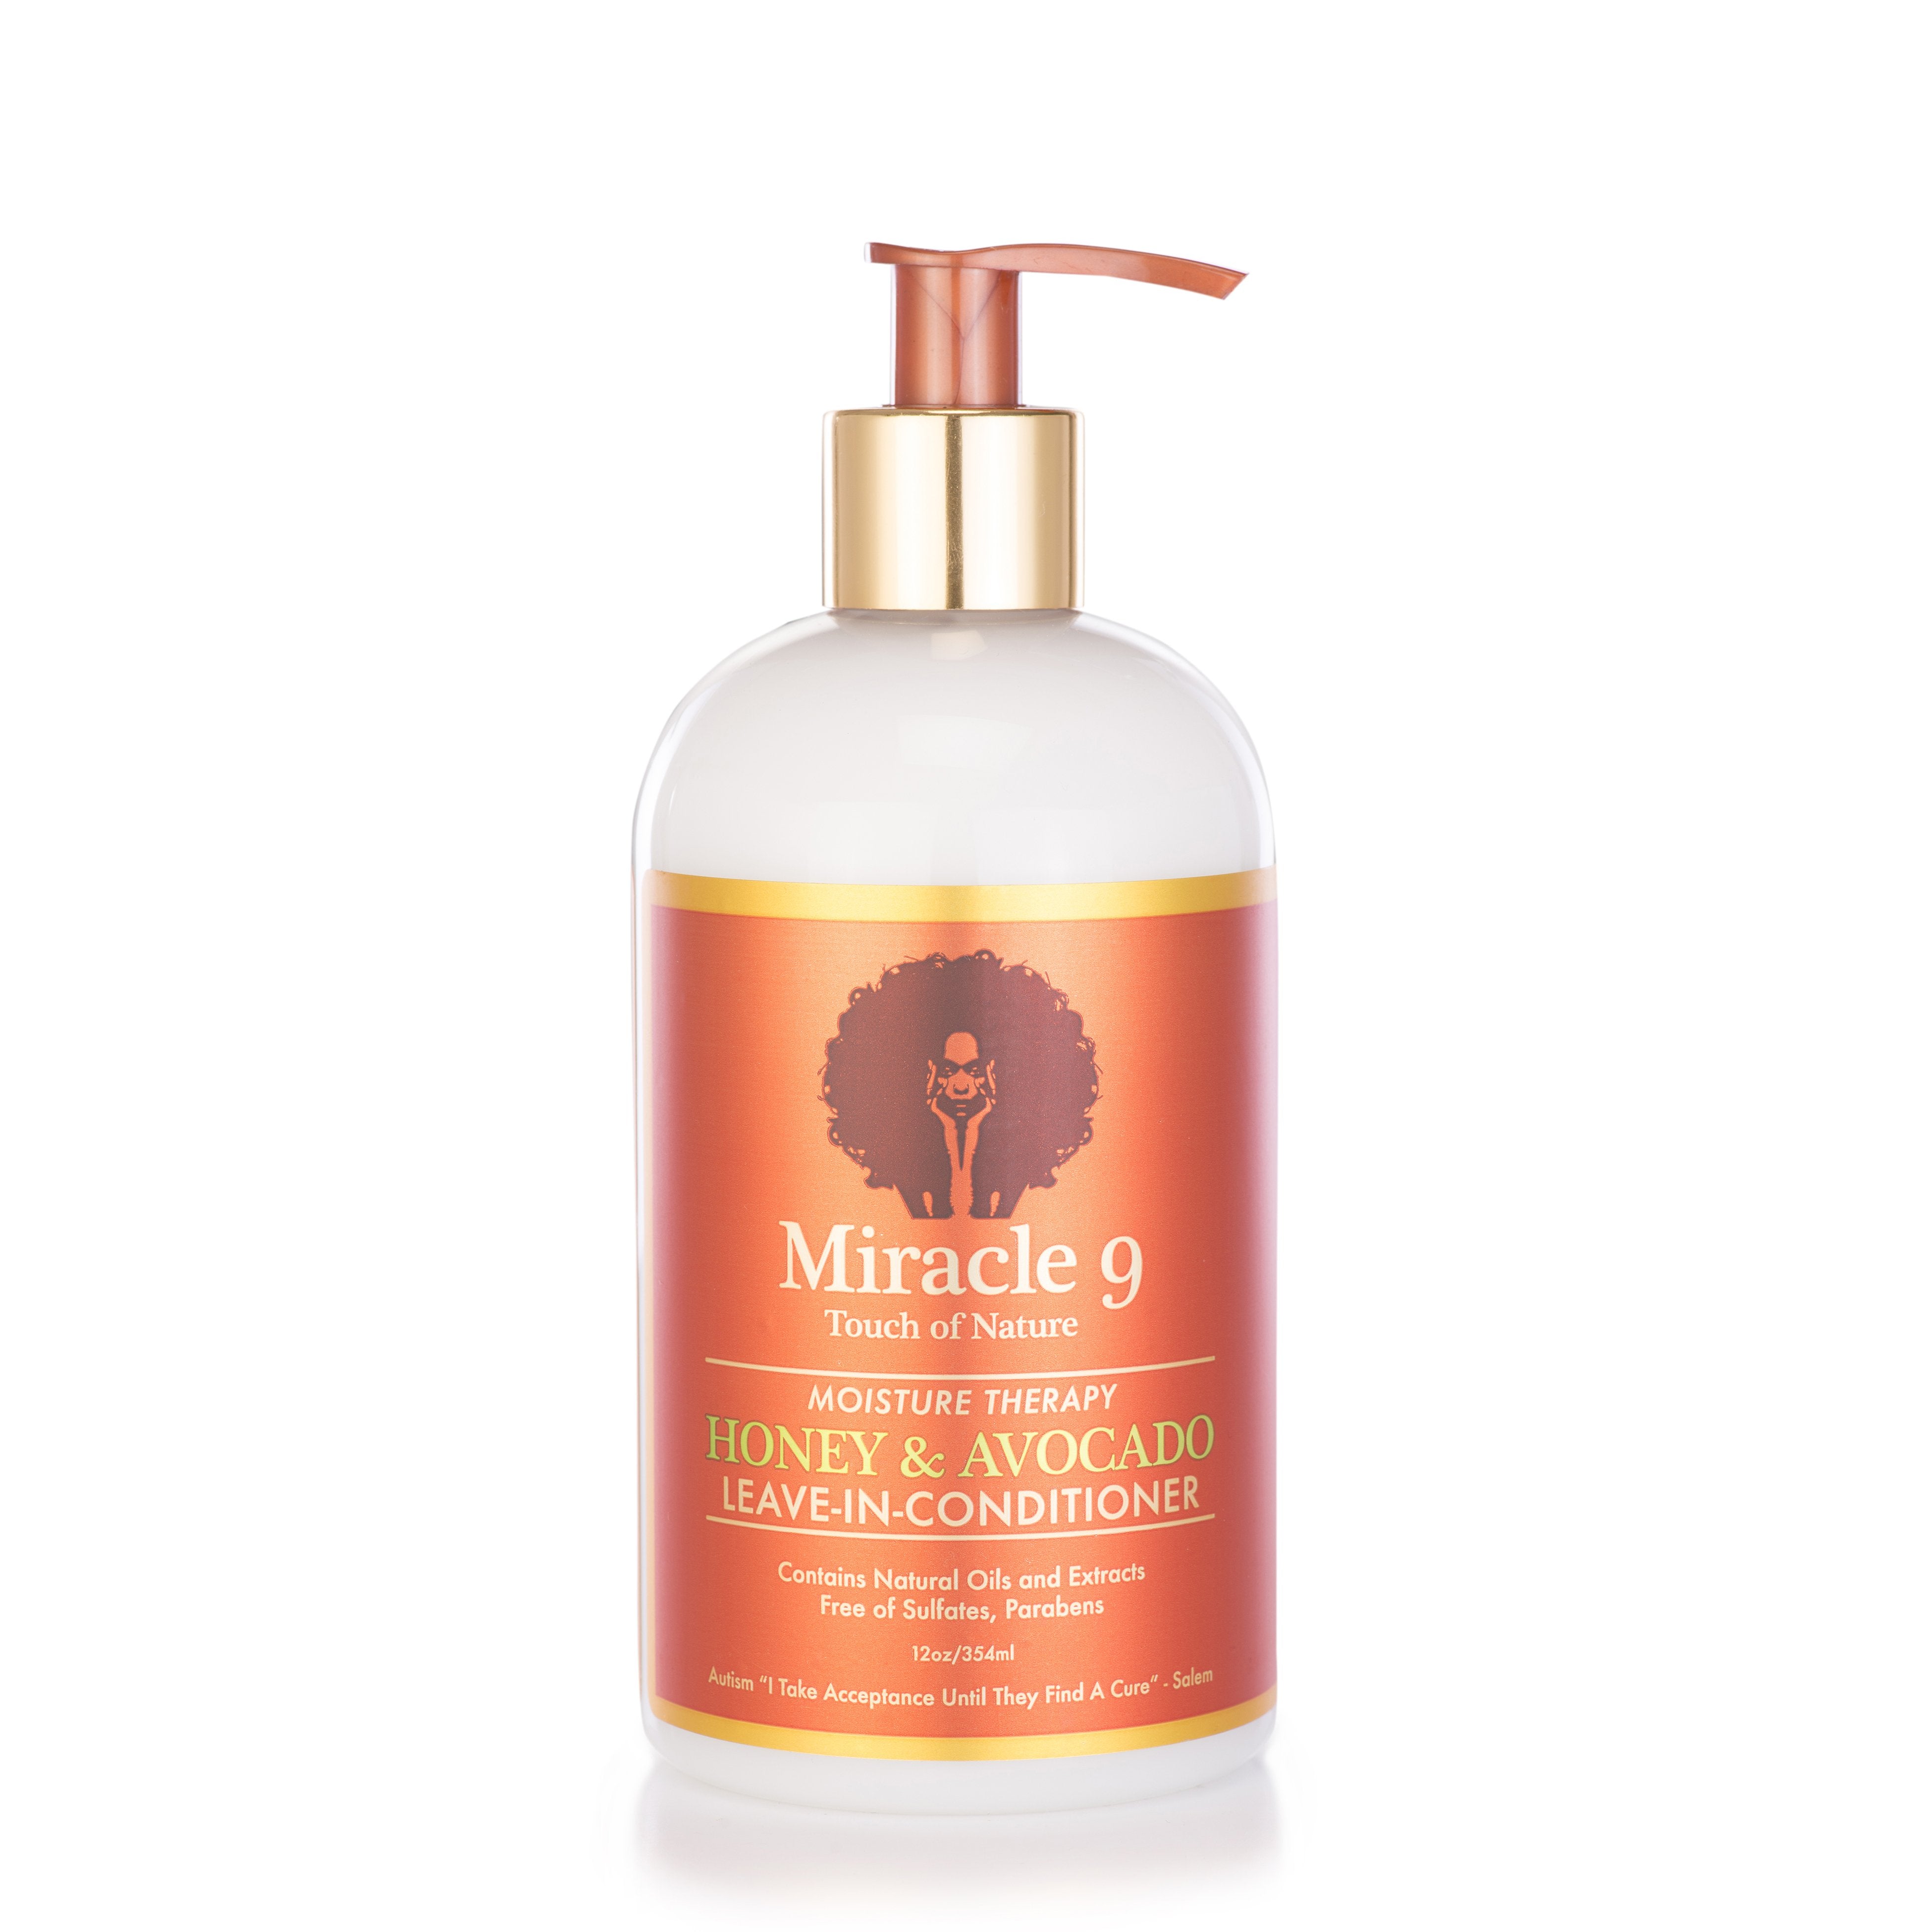 Miracle 9 Moisture Therapy Honey & Avocado Leave In Conditioner 12Oz